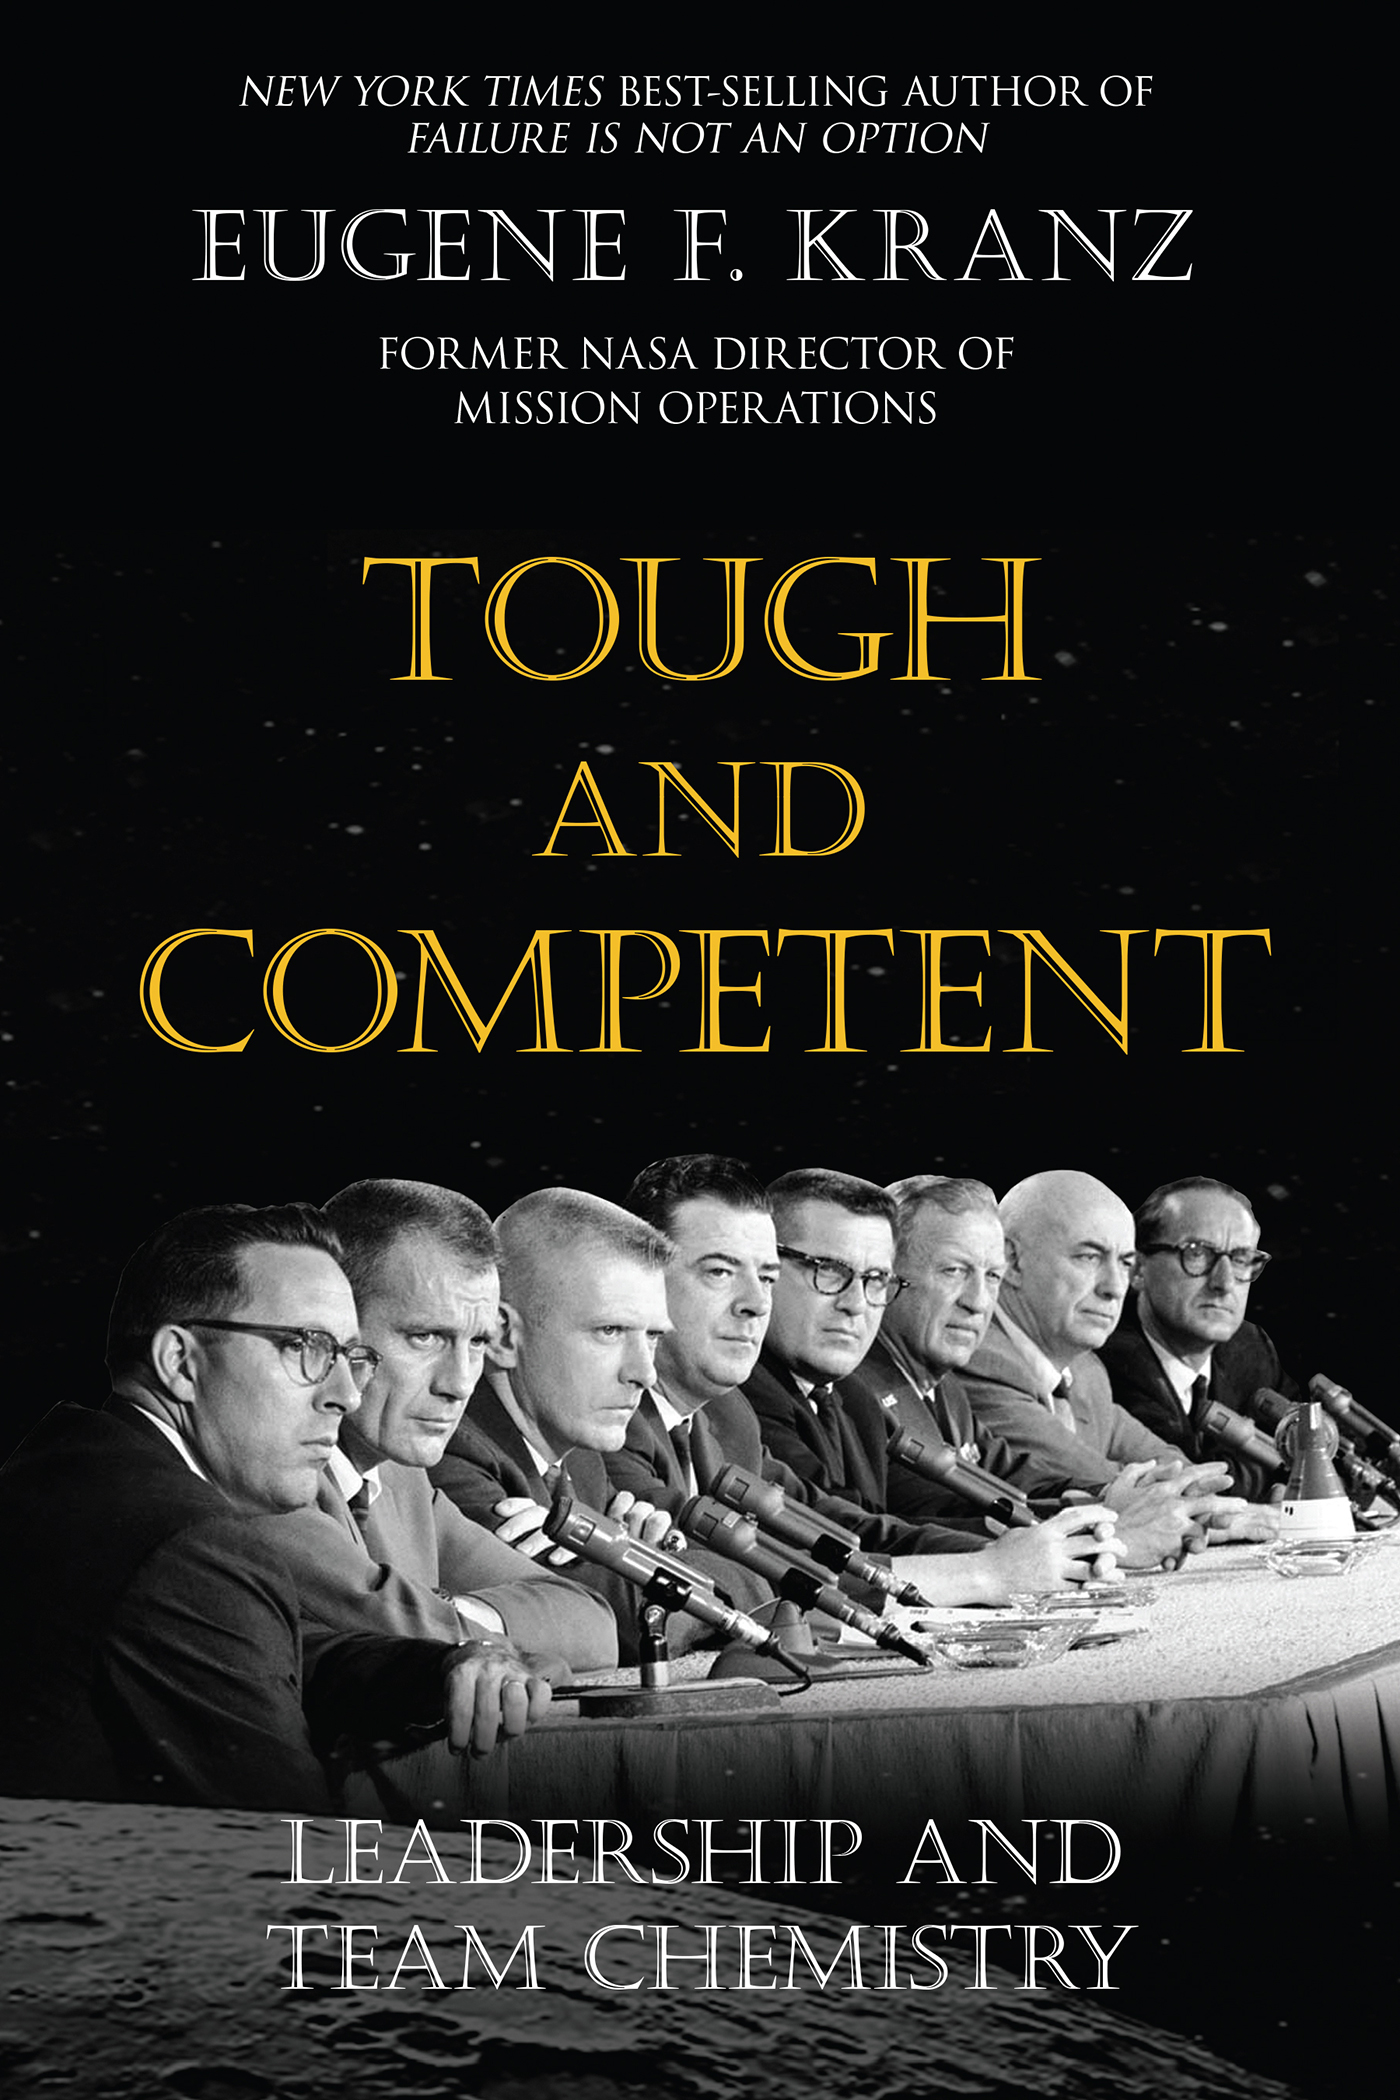 Tough and Competent by Eugene F. Kranz